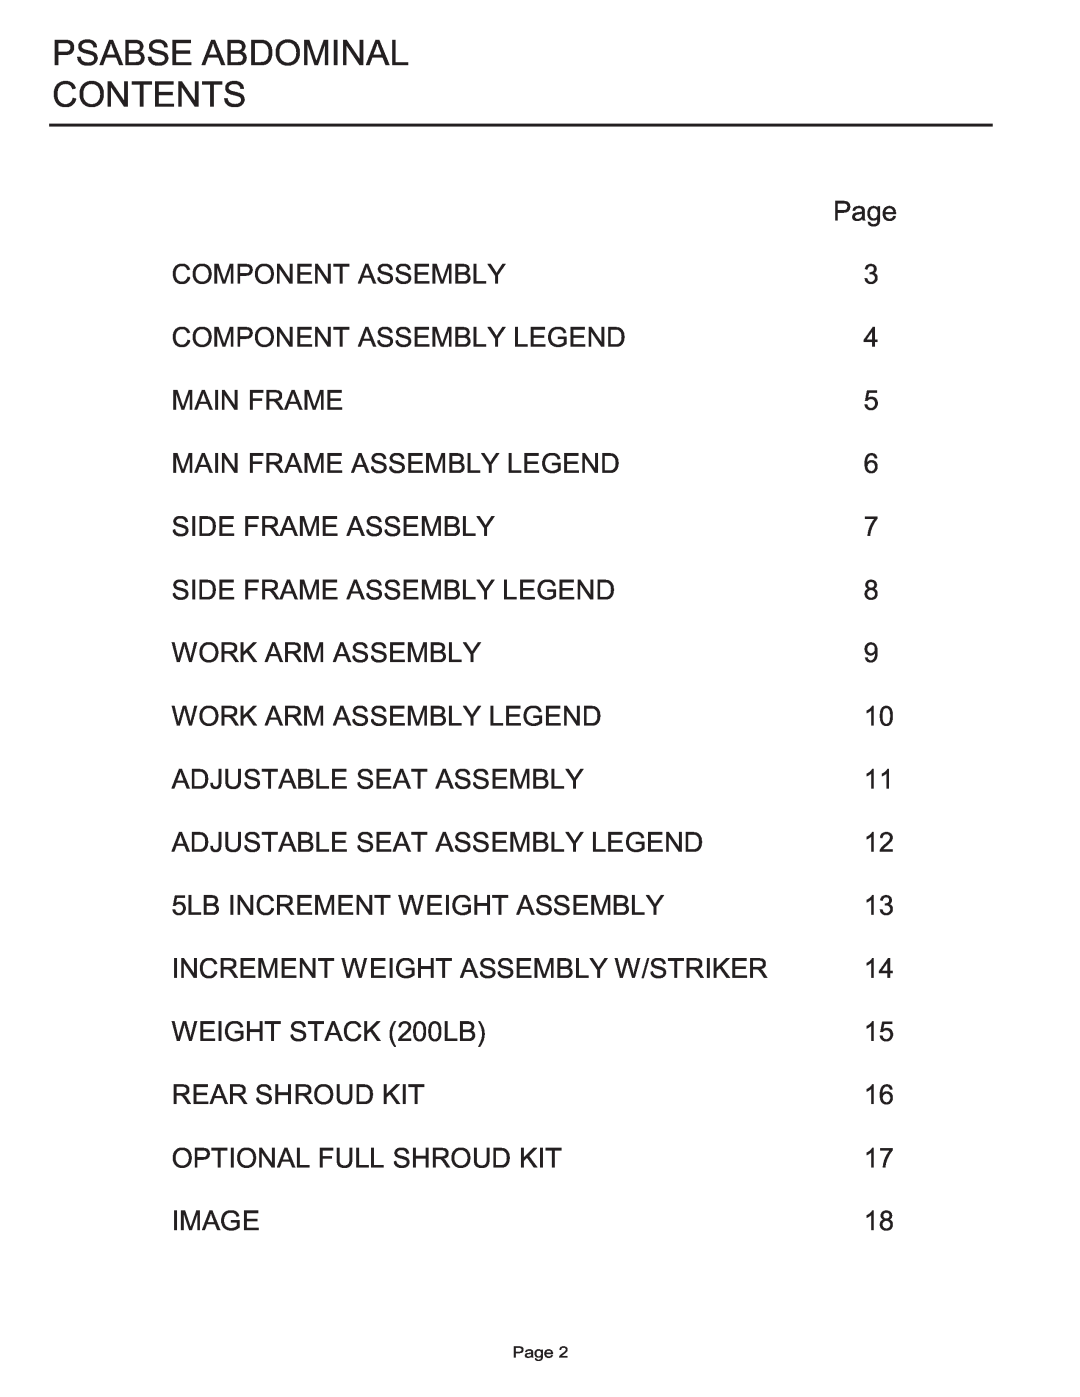 Life Fitness PSABSE manual Psabse Abdominal Contents 